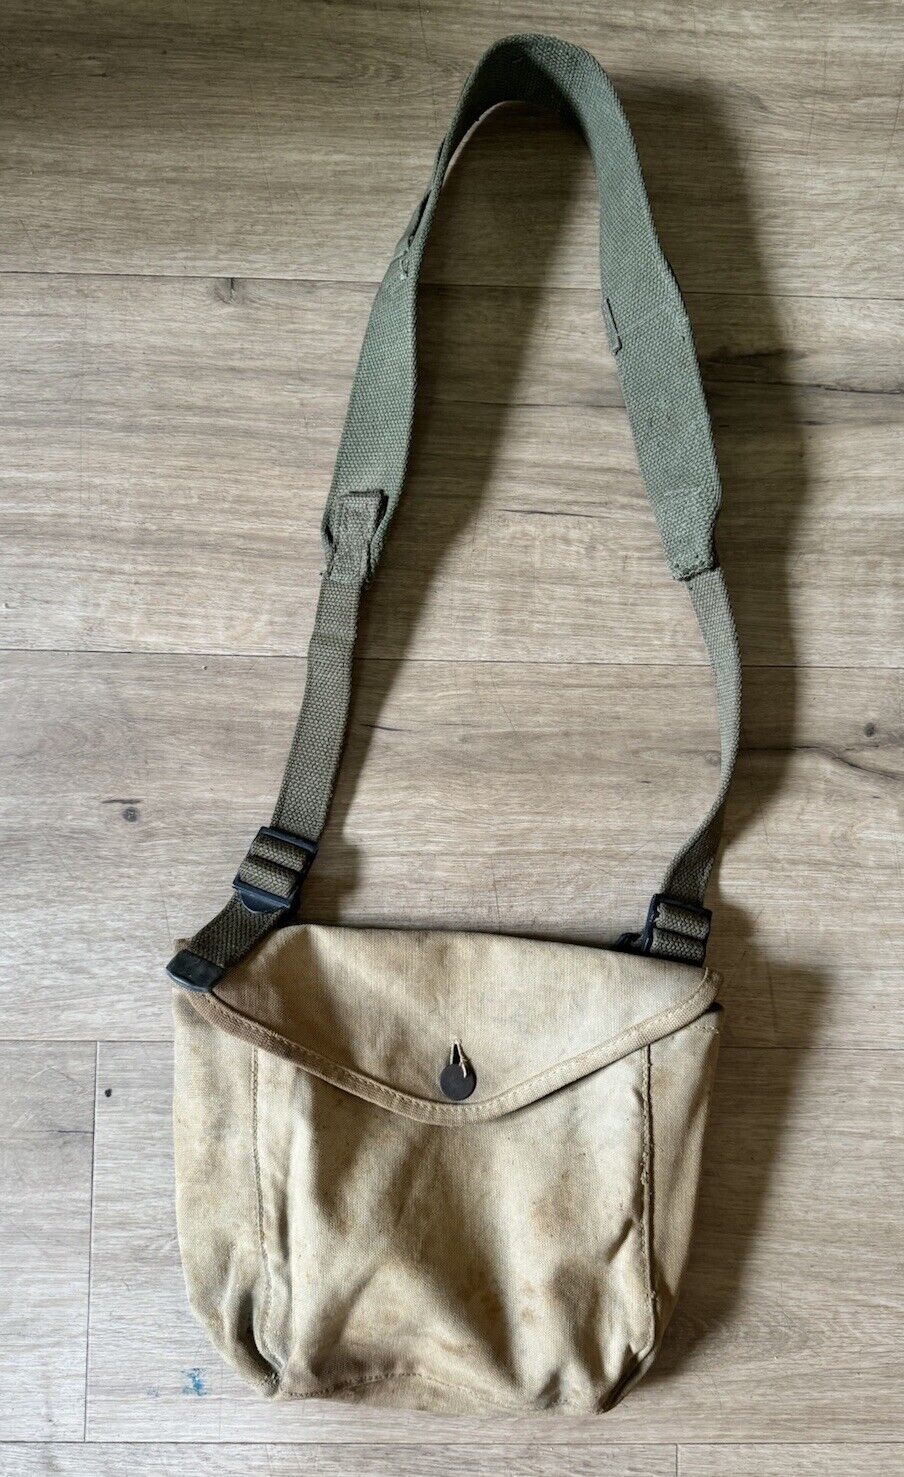 ORIGINAL WWI US ARMY M1910 HAVERSACK MESS KIT CARRY POUCH Canvas Prouducts 1918